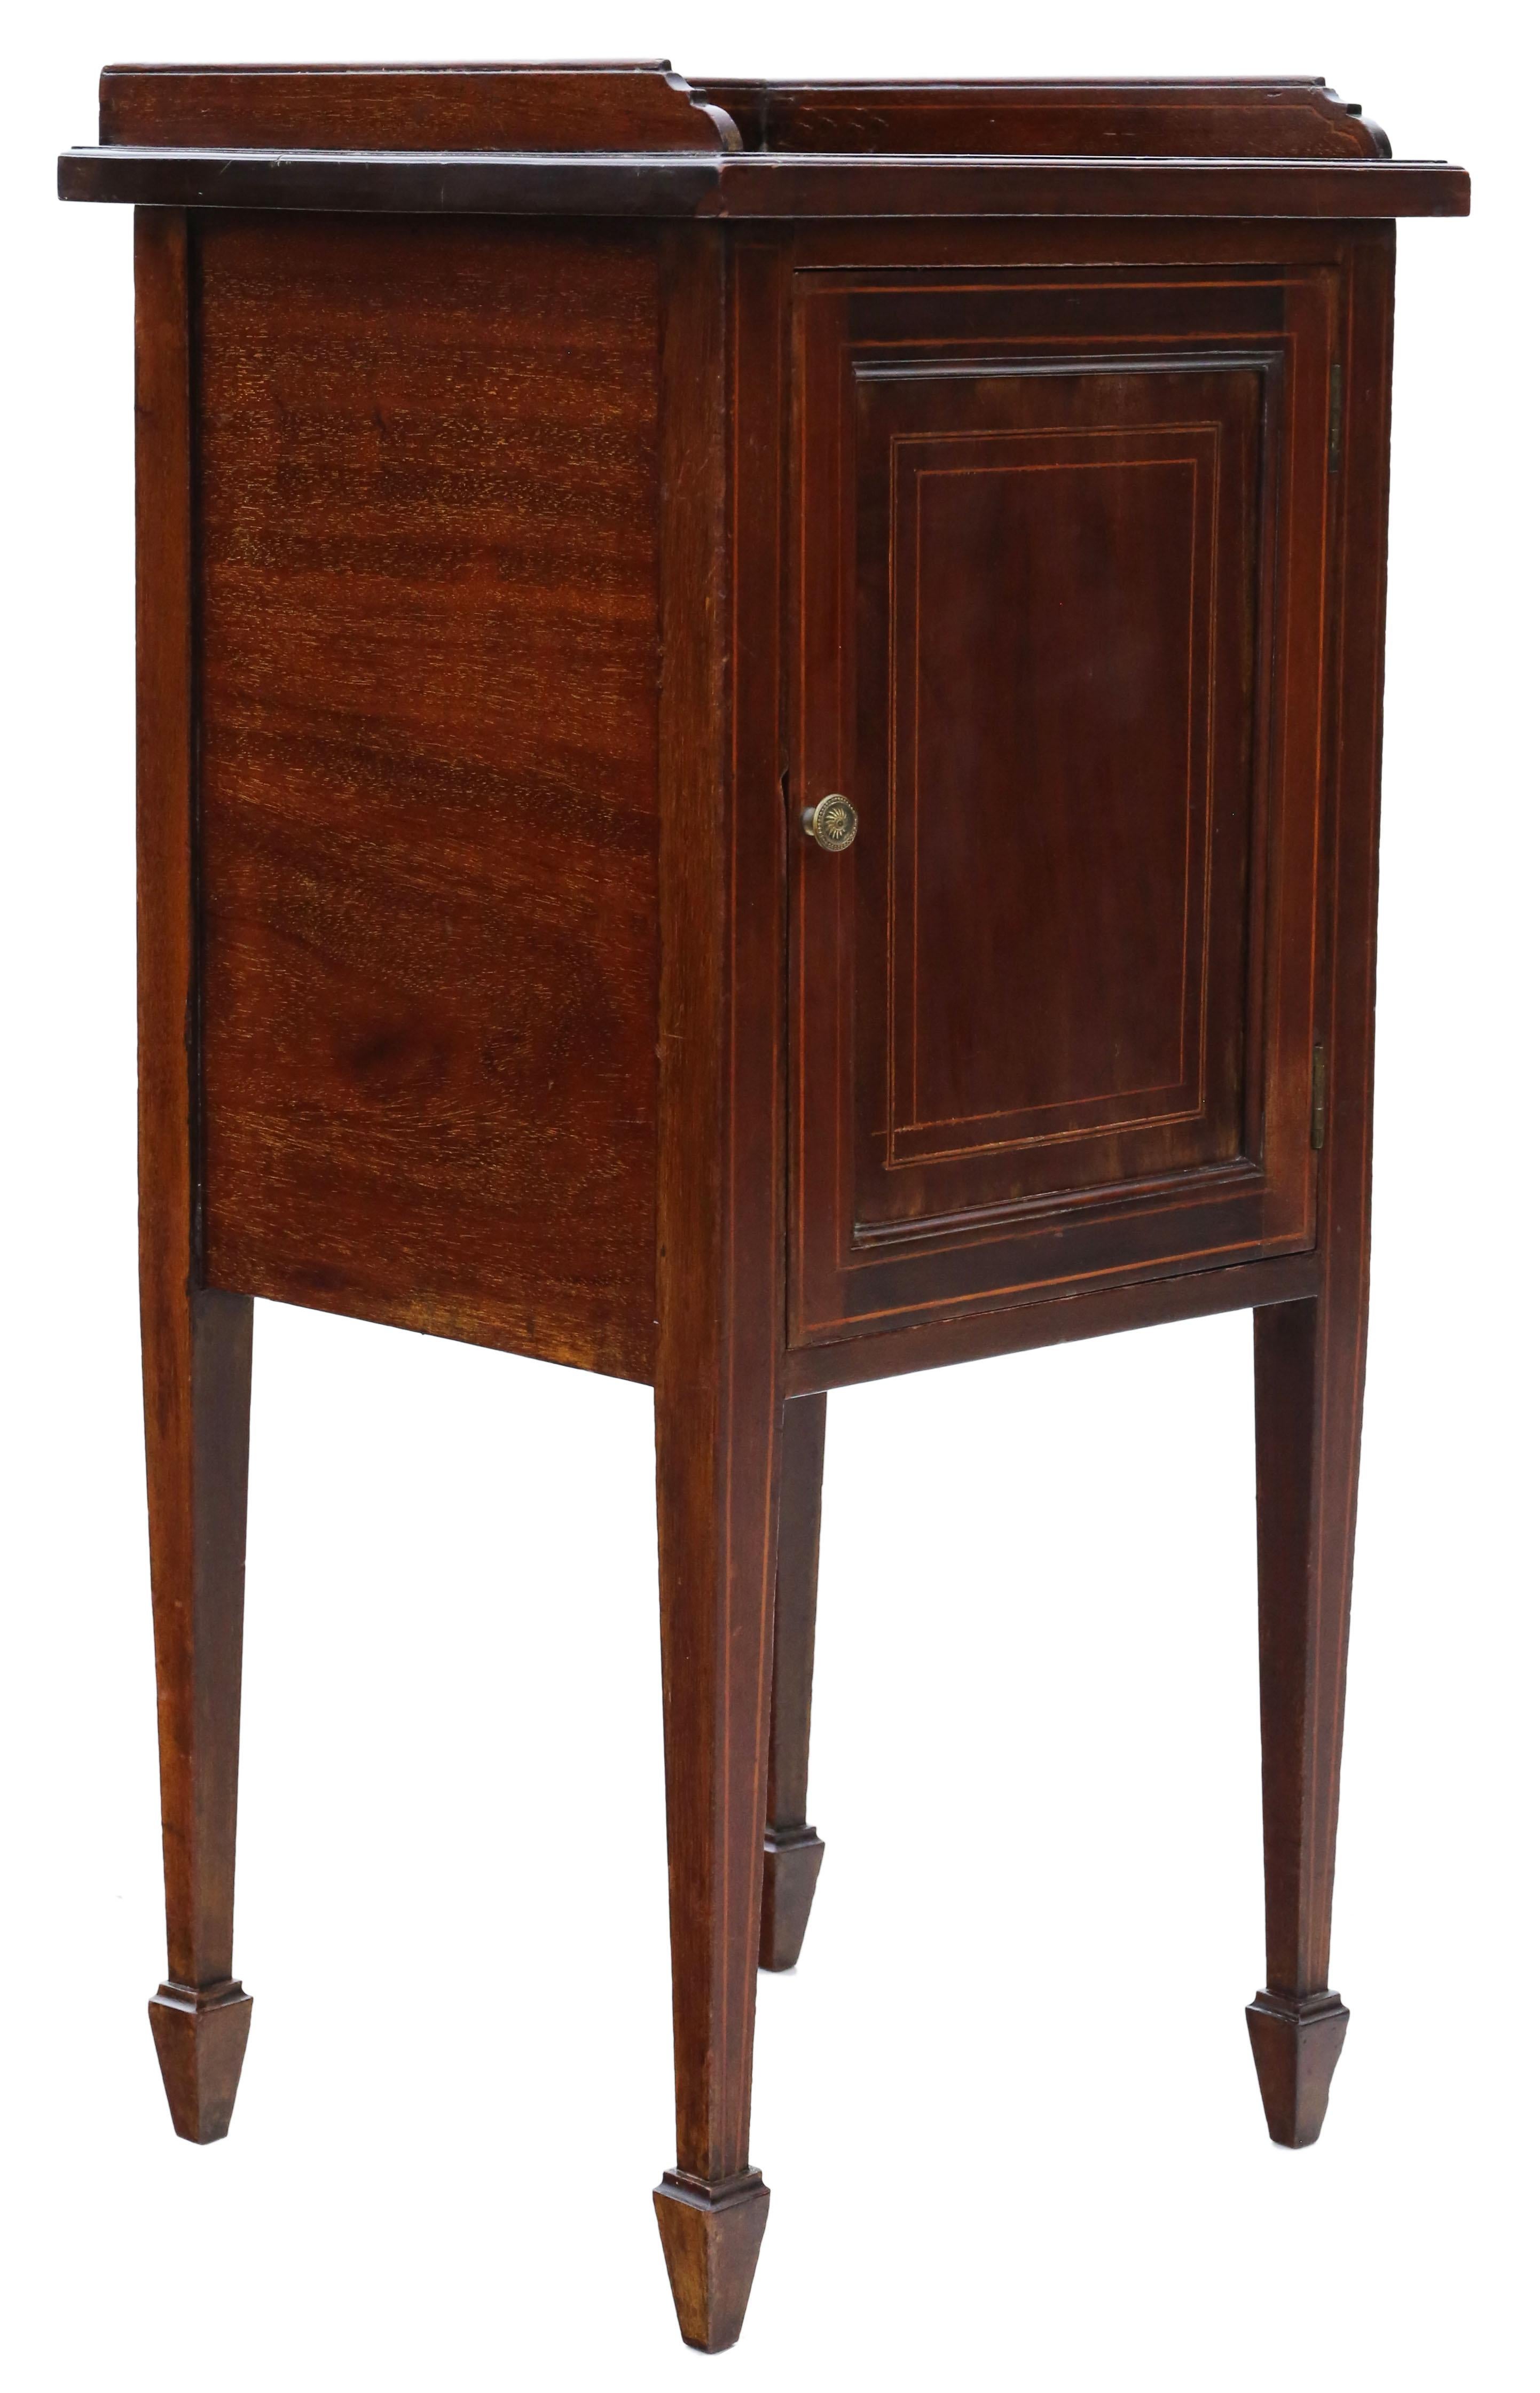 Wood Antique Fine Quality Tray Top Inlaid Mahogany Bedside Table Cupboard, circa 1905 For Sale